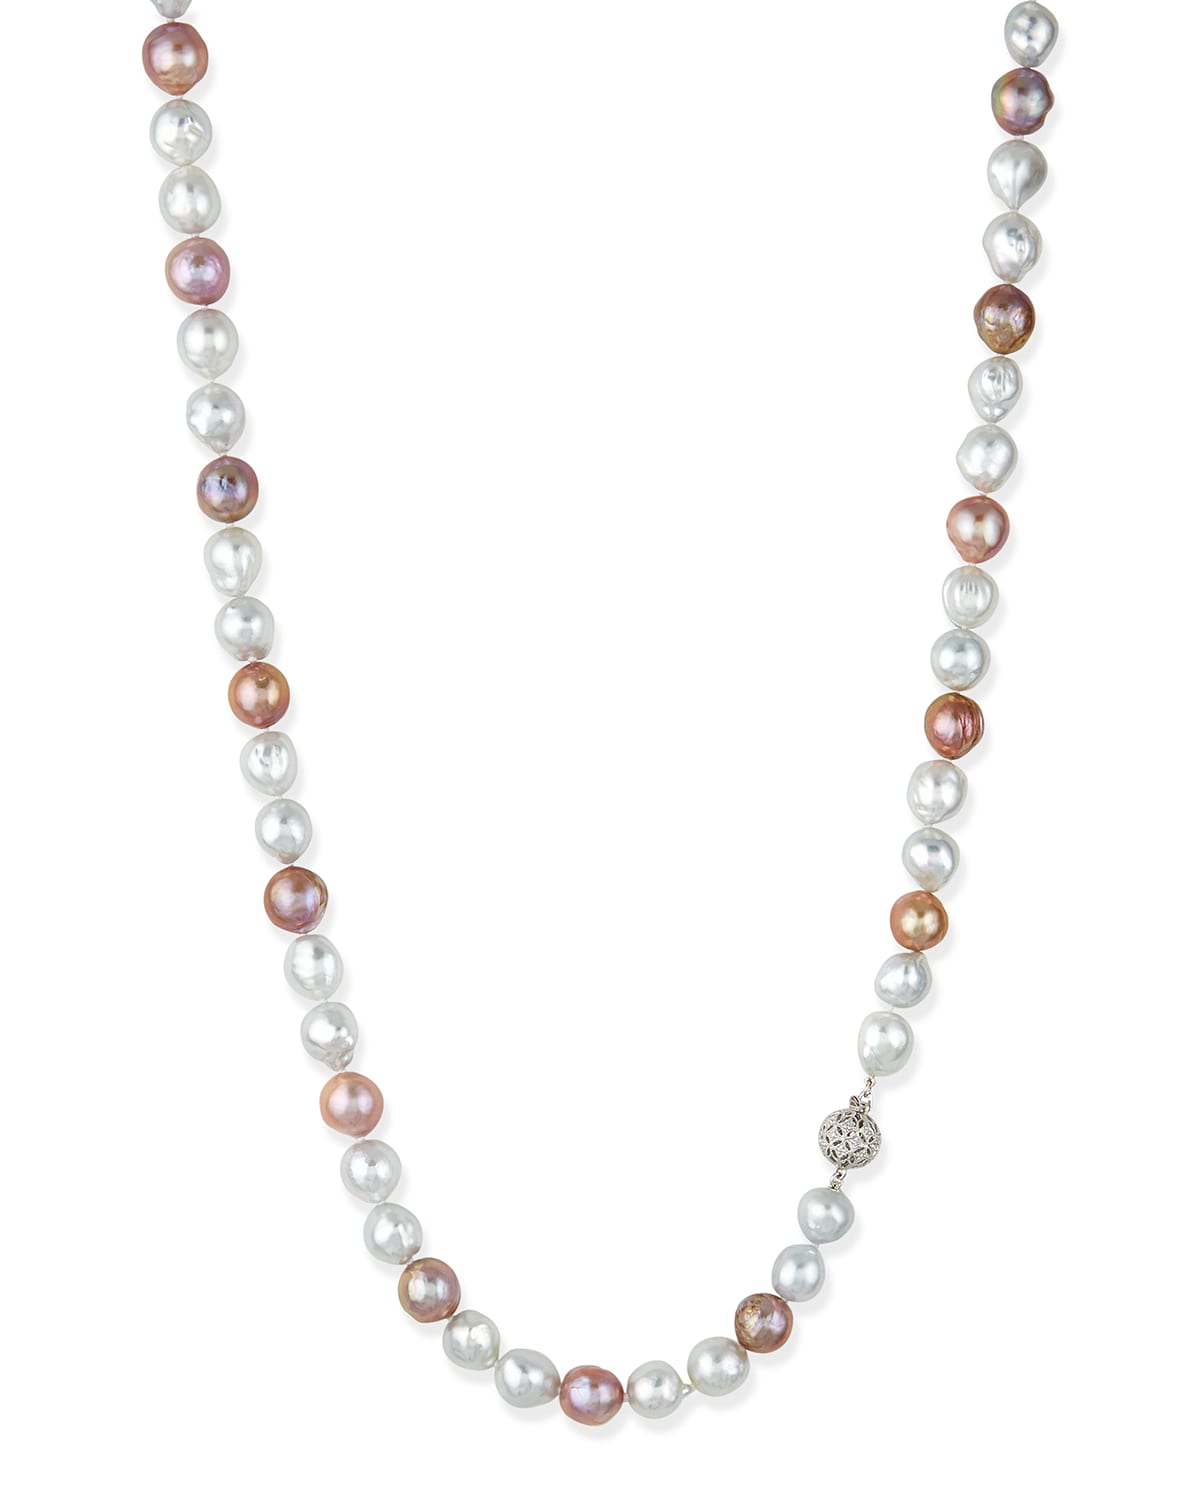 Belpearl Pink & White Opera Pearl Necklace with Diamond Clasp